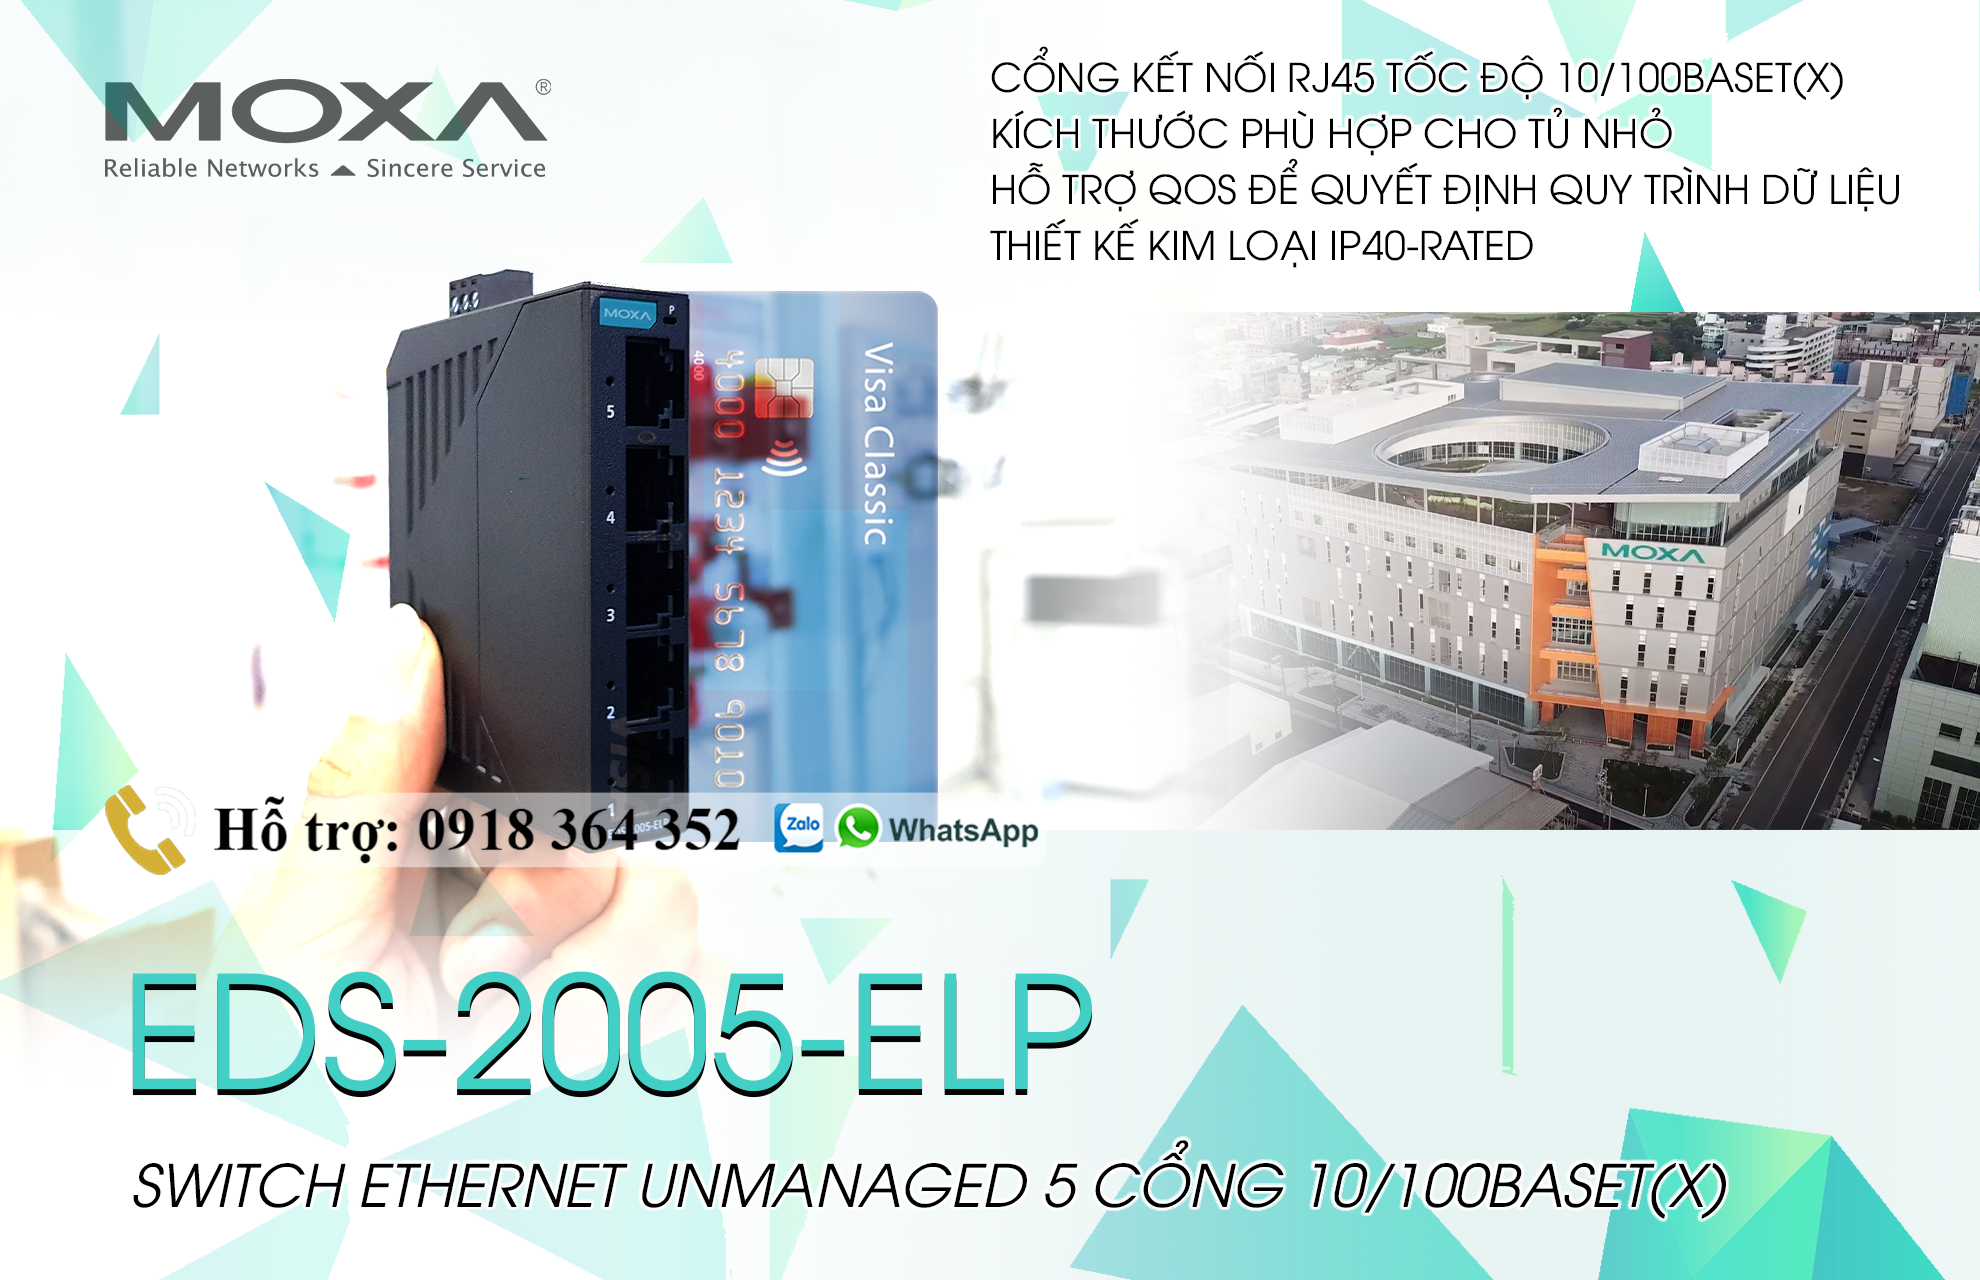 eds-2005-el-t-switch-ethernet-managed-5-cong-10-100baset-x-dai-ly-switch-mang-cong-nghiep-moxa-viet-nam.png